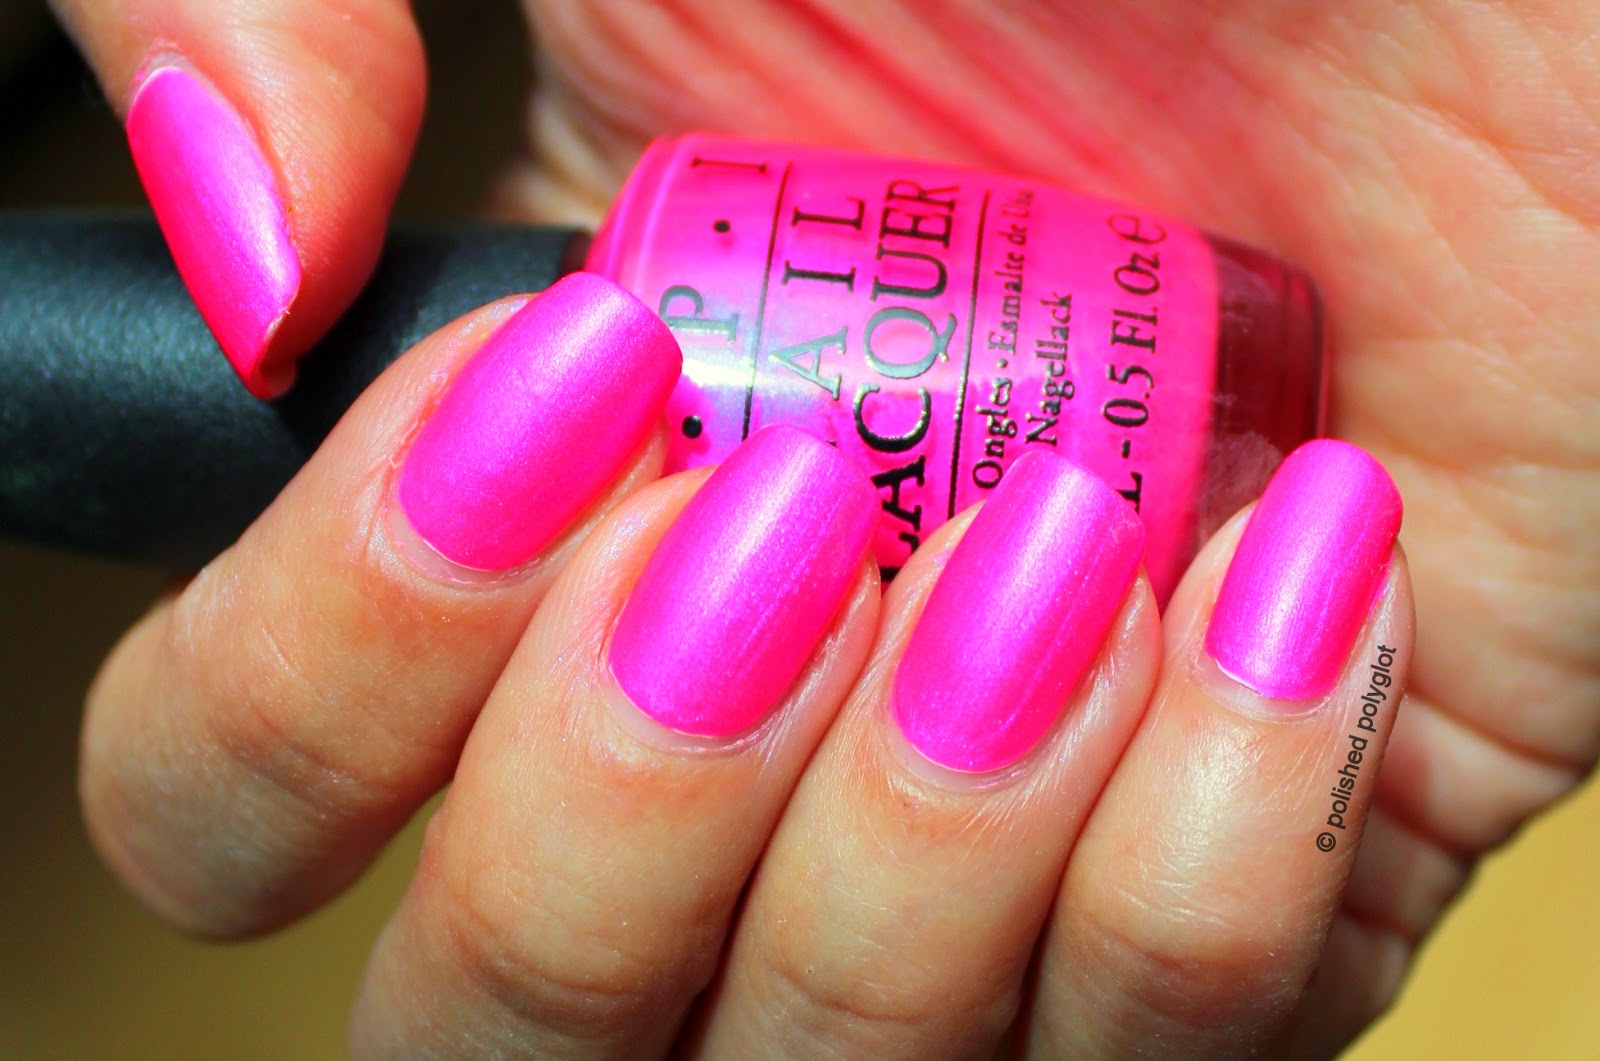 1. OPI Nail Lacquer in "Hotter Than You Pink" - wide 1